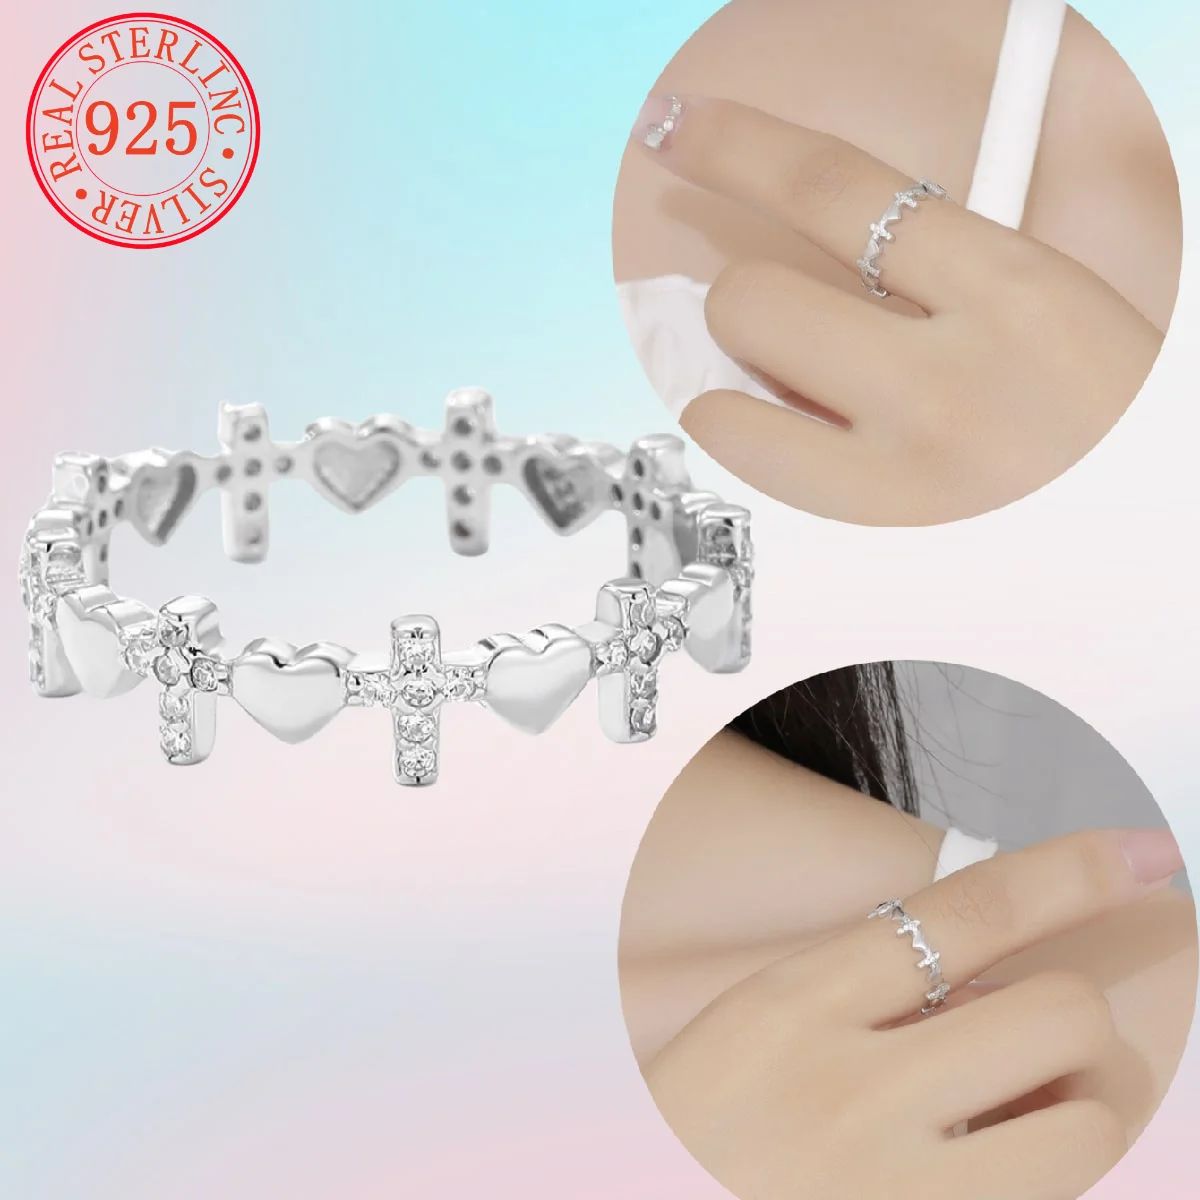 

Fashionable and Charming S925 Sterling Silver Ring with Cross and Heart Design, Inlaid with Sparkling Diamonds Party DailyWear